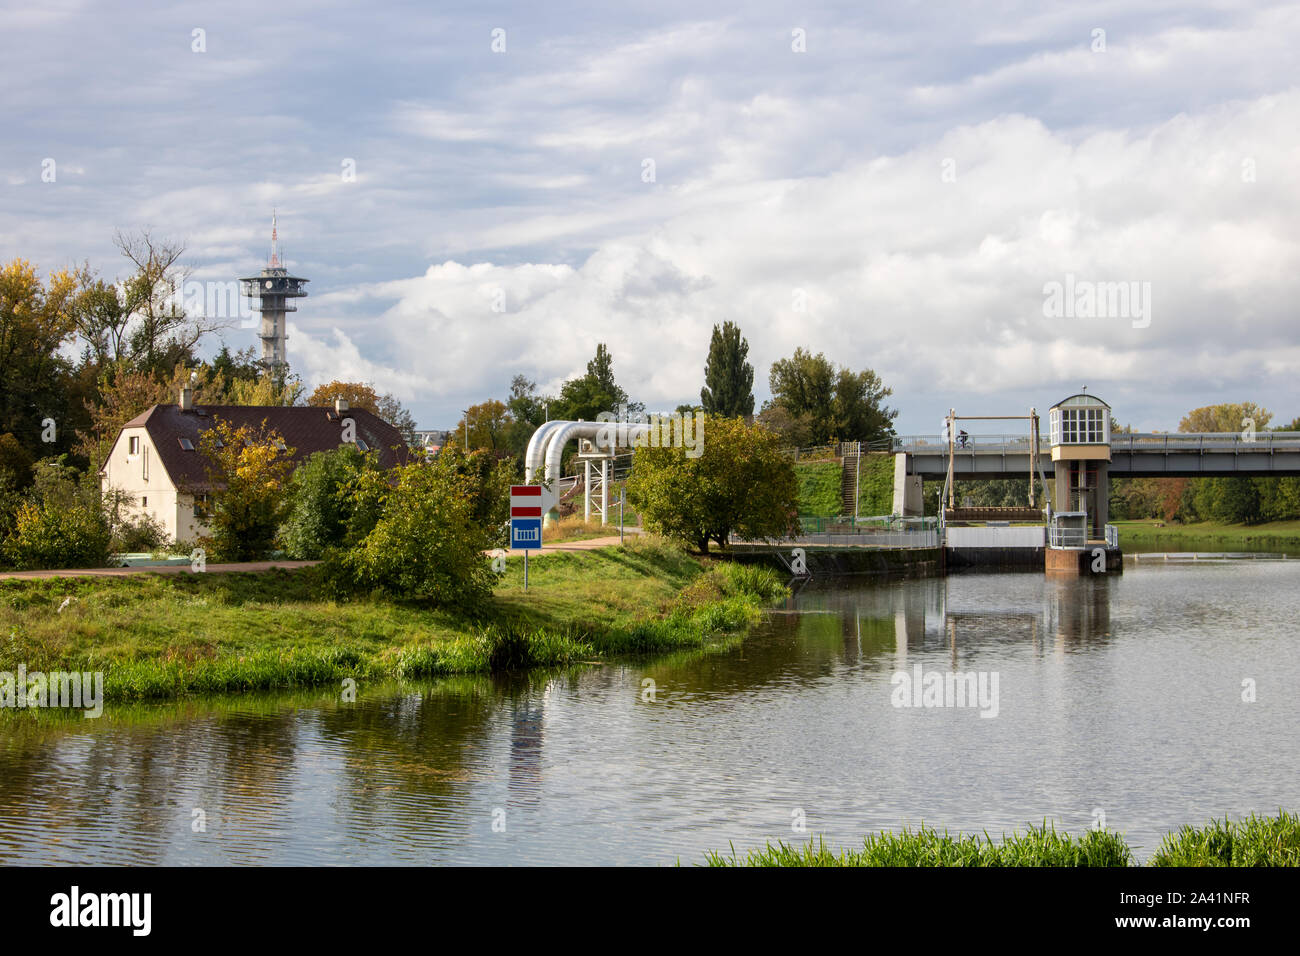 View of the Labe (Elbe) river where it intersectes with the Chrudimka River in Pardubice, Czech Republic. Stock Photo